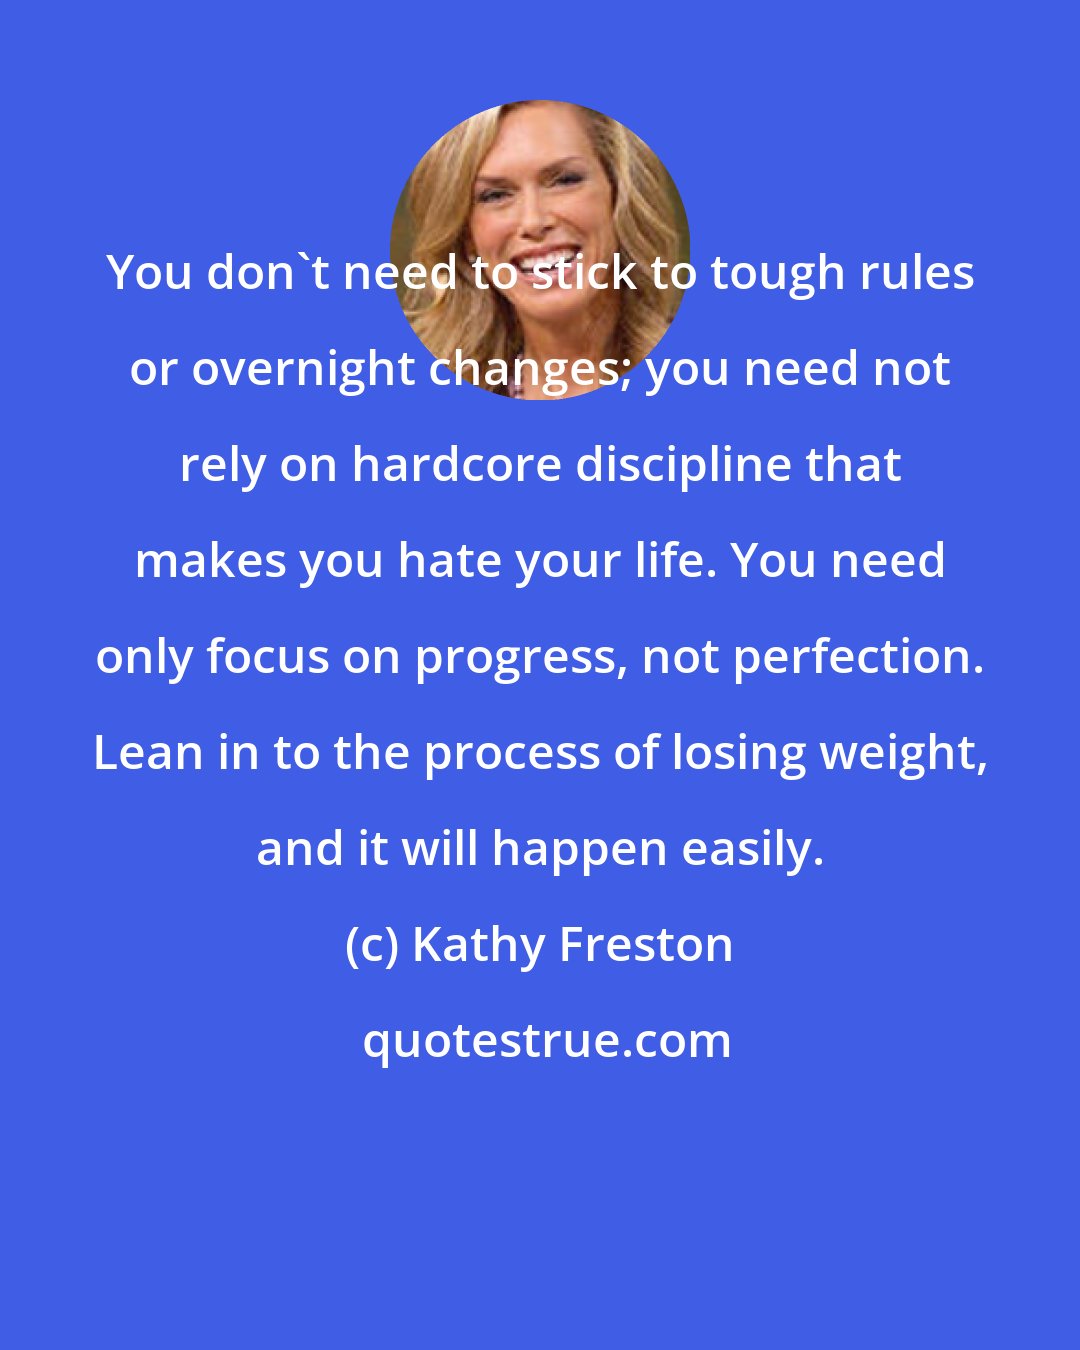 Kathy Freston: You don't need to stick to tough rules or overnight changes; you need not rely on hardcore discipline that makes you hate your life. You need only focus on progress, not perfection. Lean in to the process of losing weight, and it will happen easily.